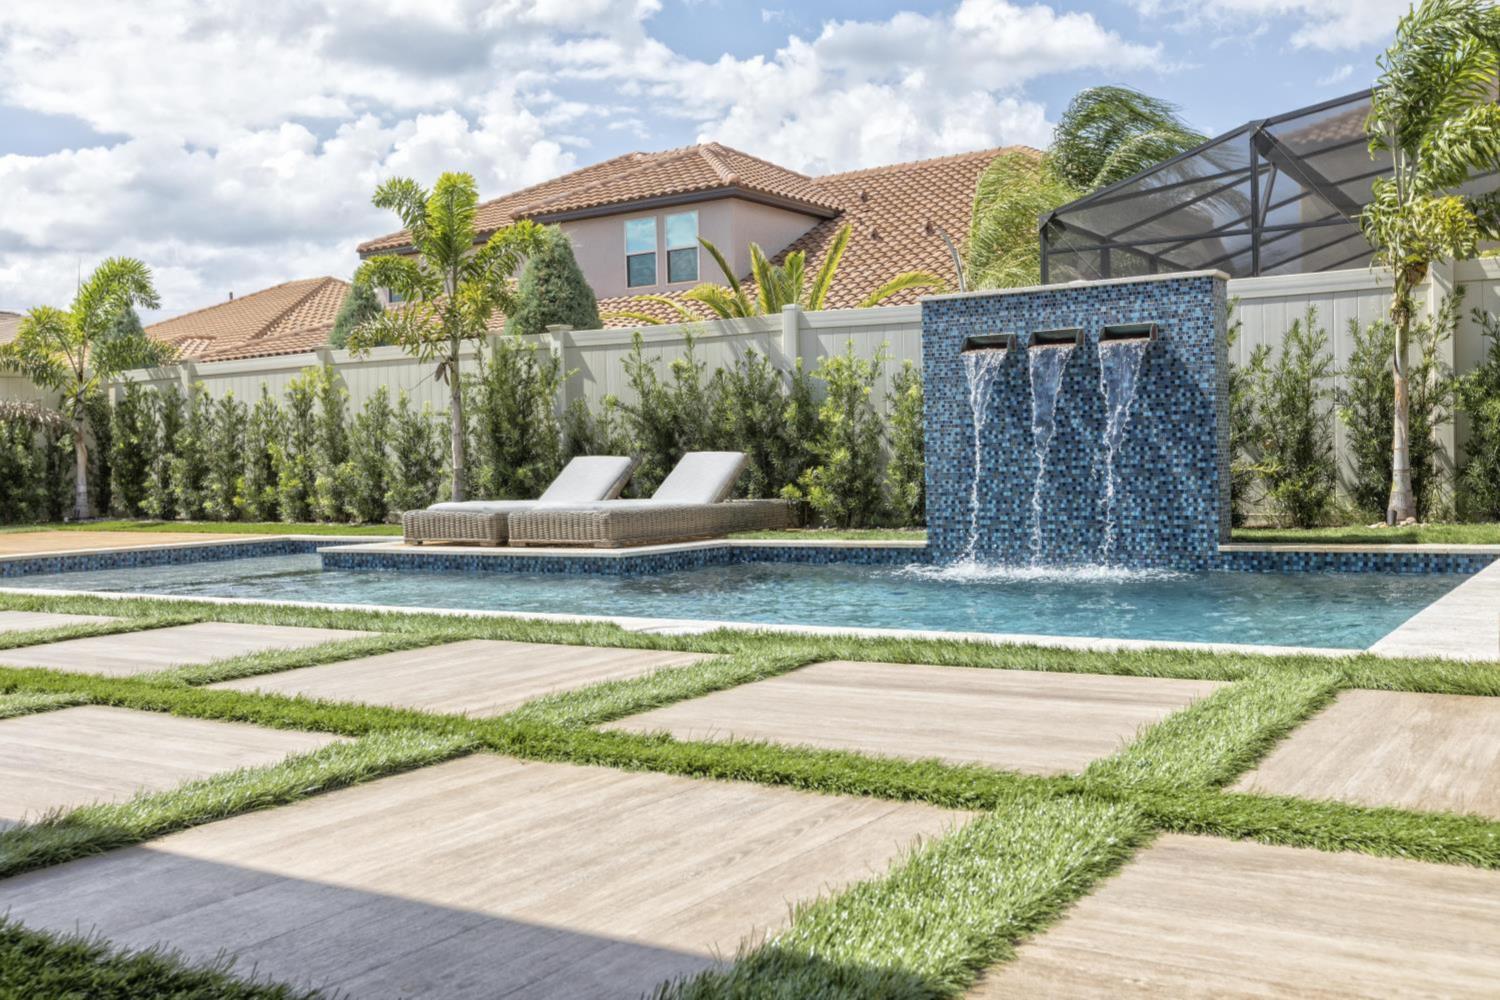 Beautiful backyard pool with water features